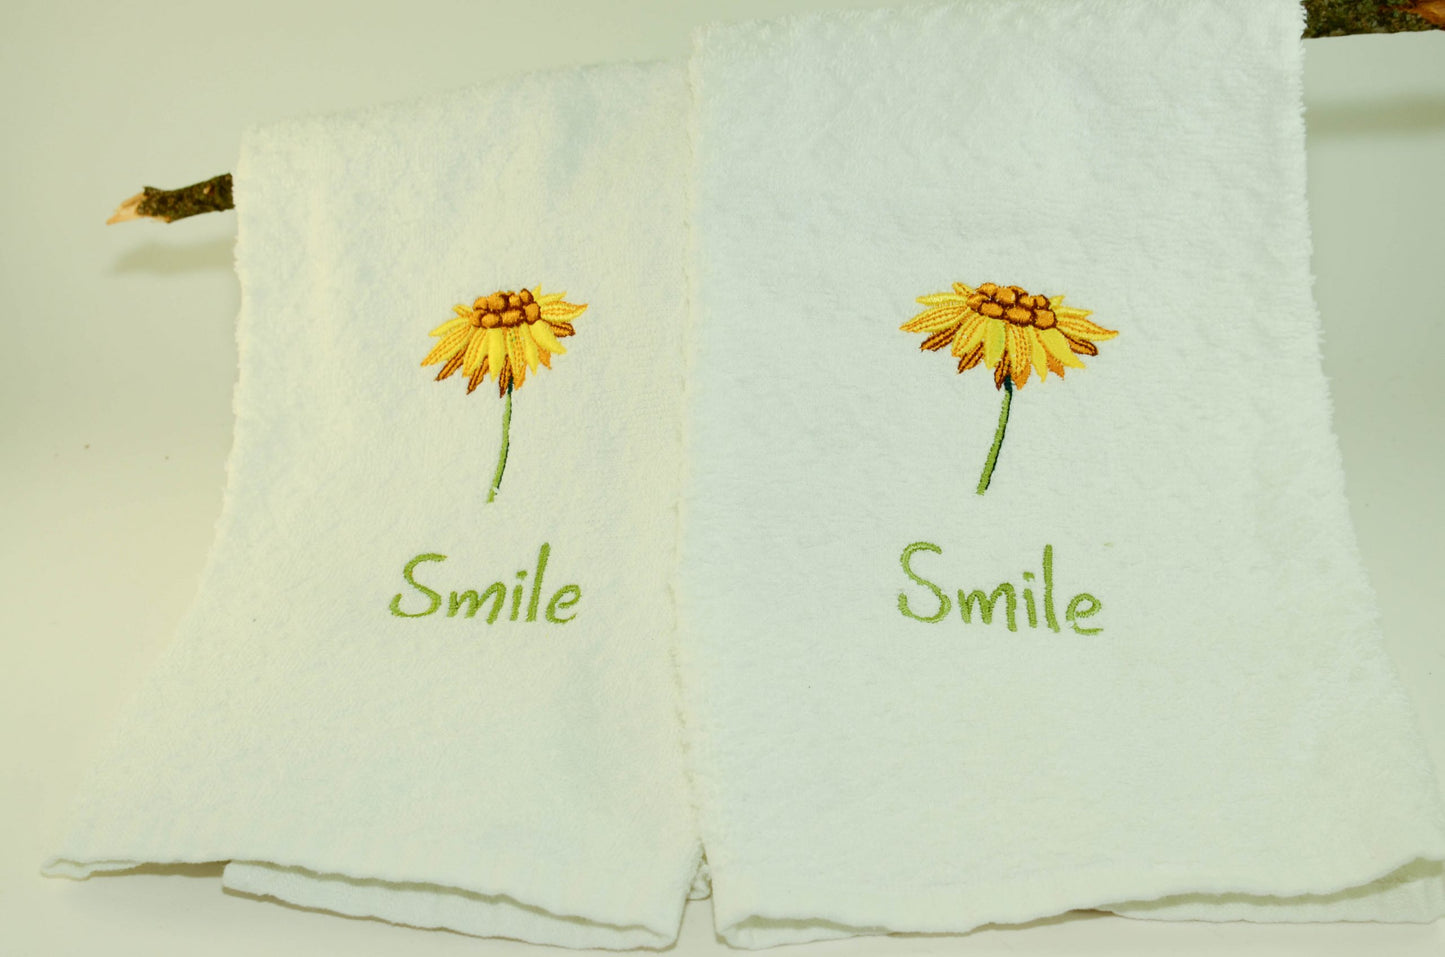 Pair of Hand Towels, Sunflower Smile, by Christine Hartman